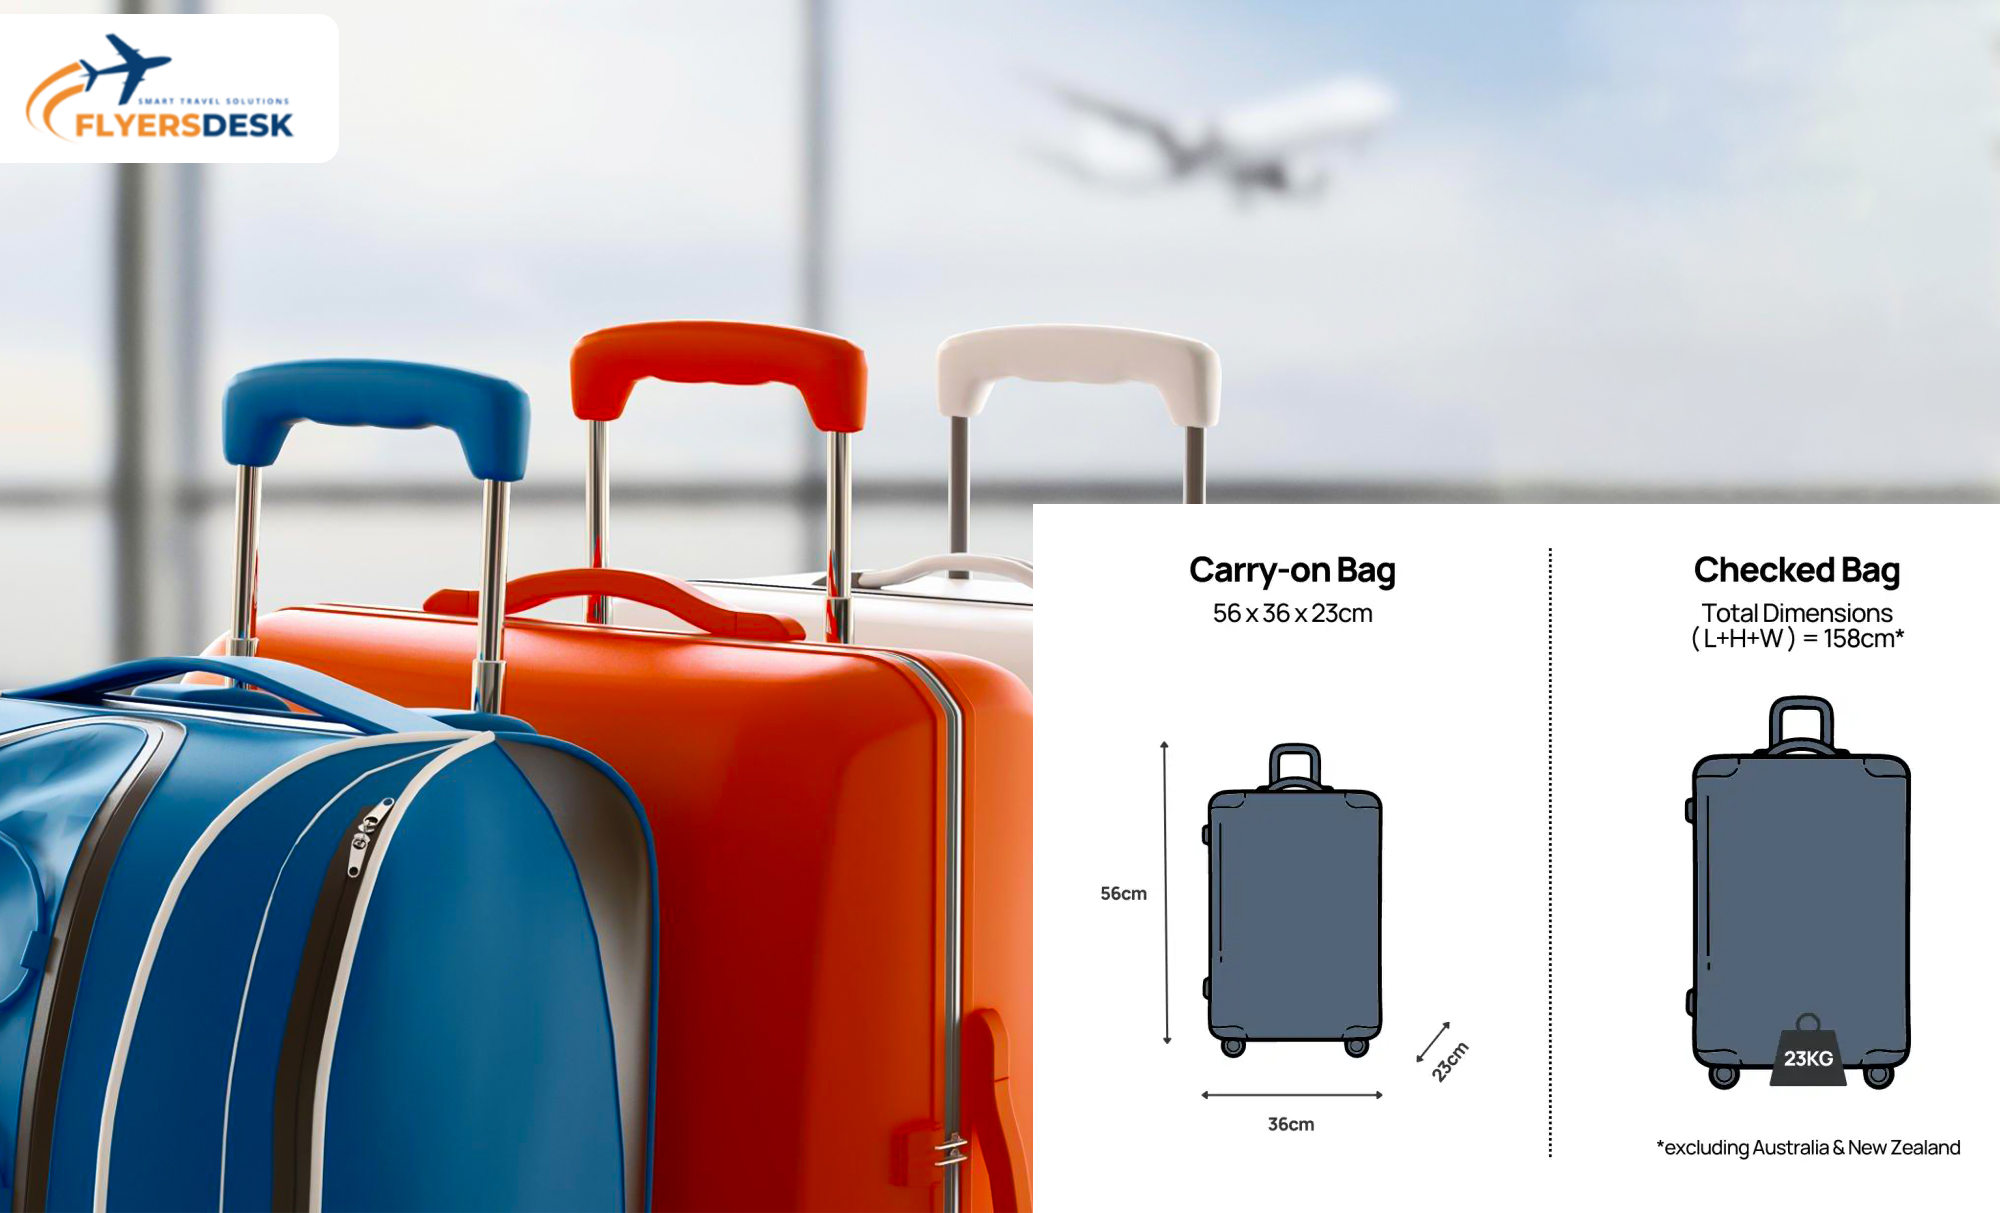 American Airlines Baggage Policy for Carry-On Bags